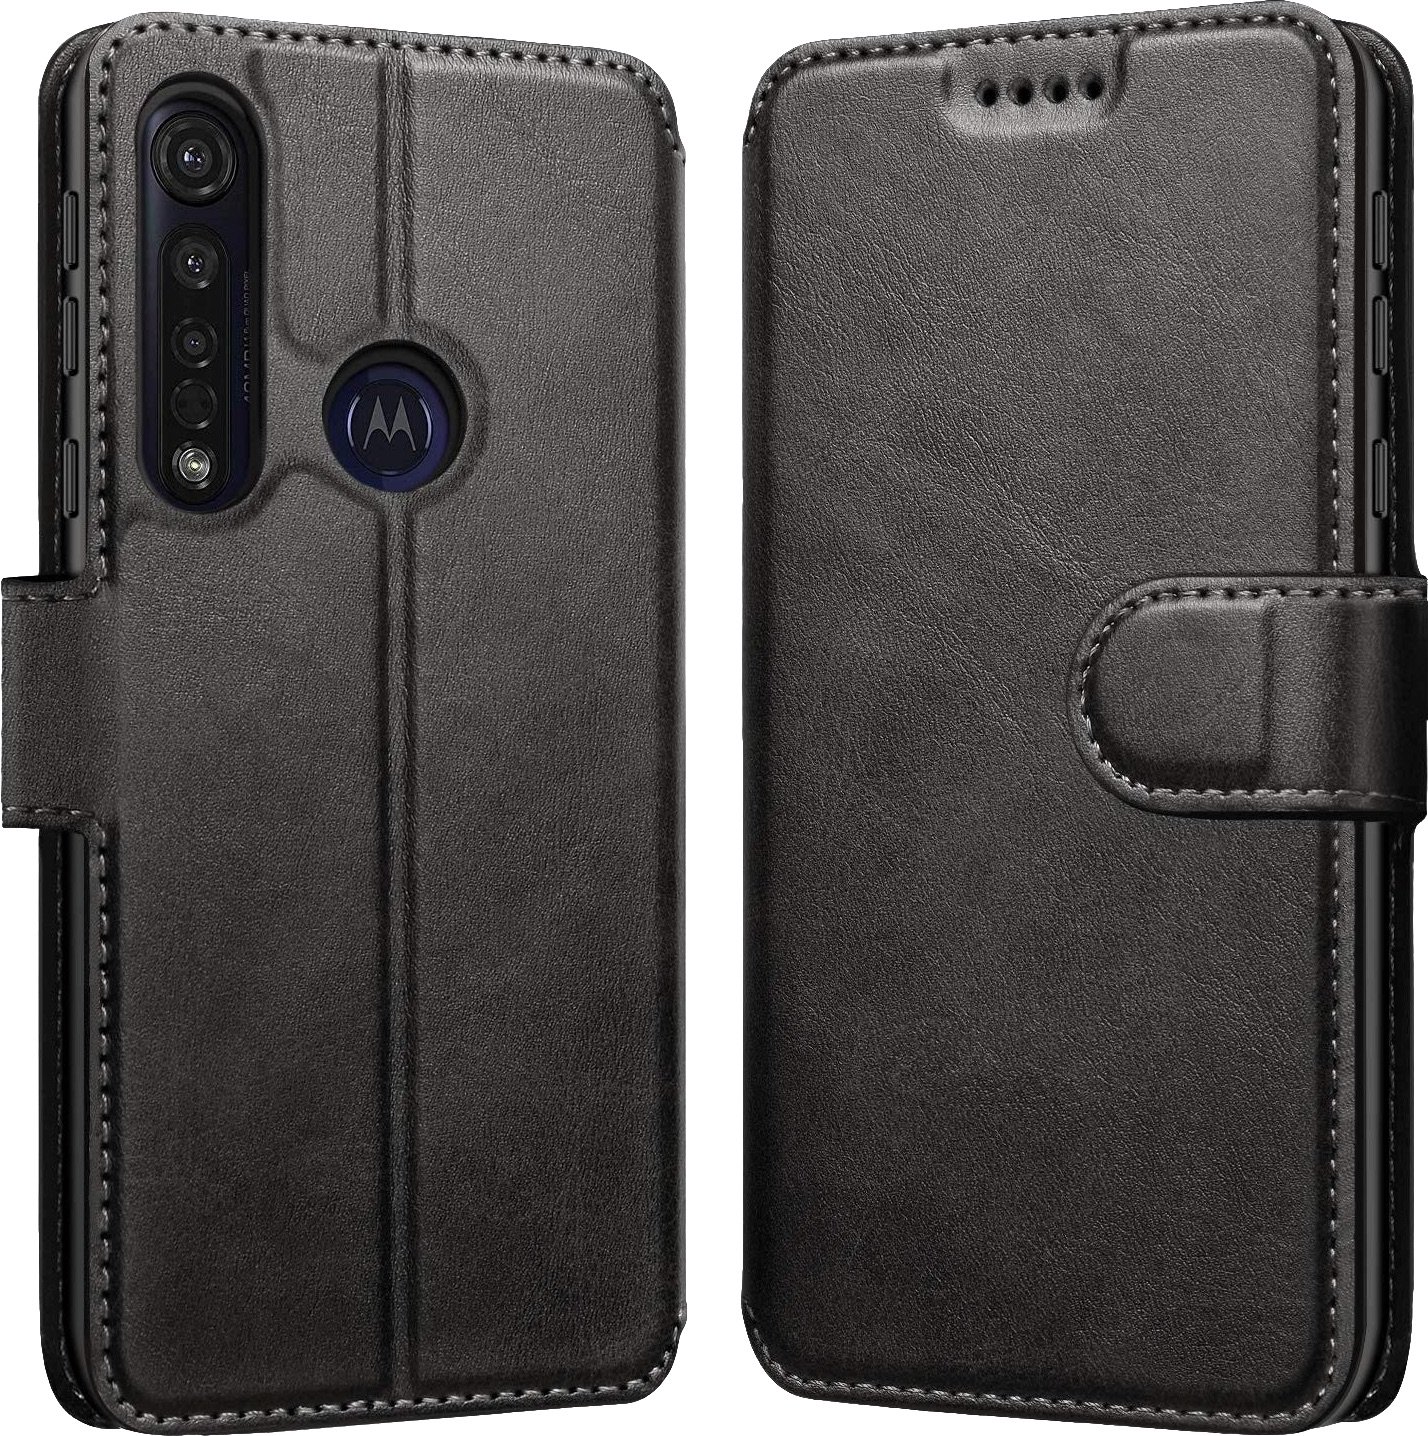 Ykooe Leather Flip Wallet for Moto G8 Plus